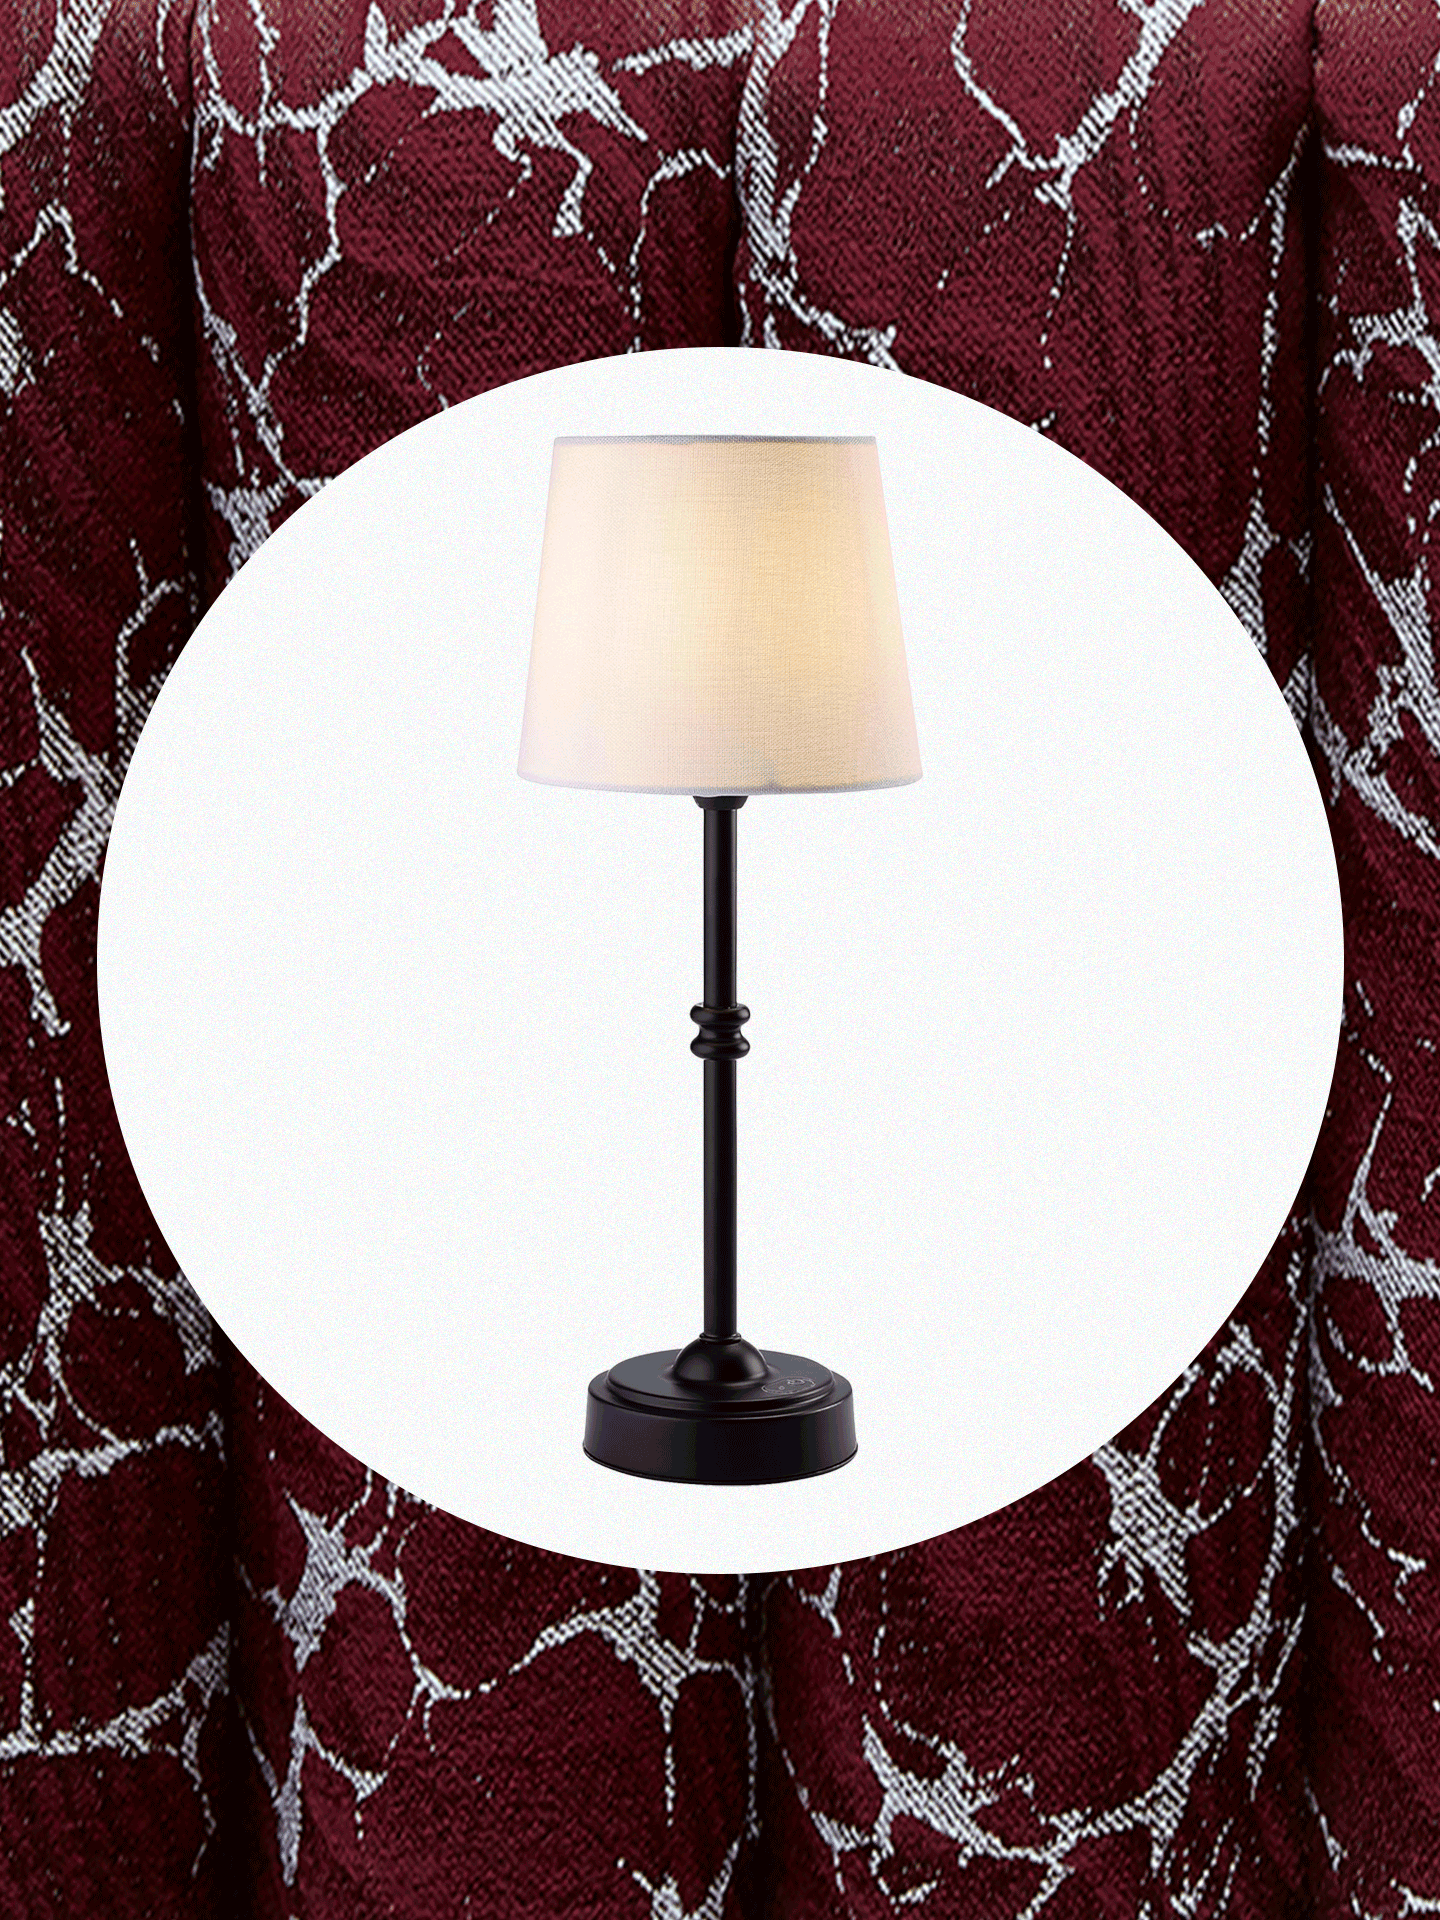 gif of amazon cordless table lamps on tablecloth background